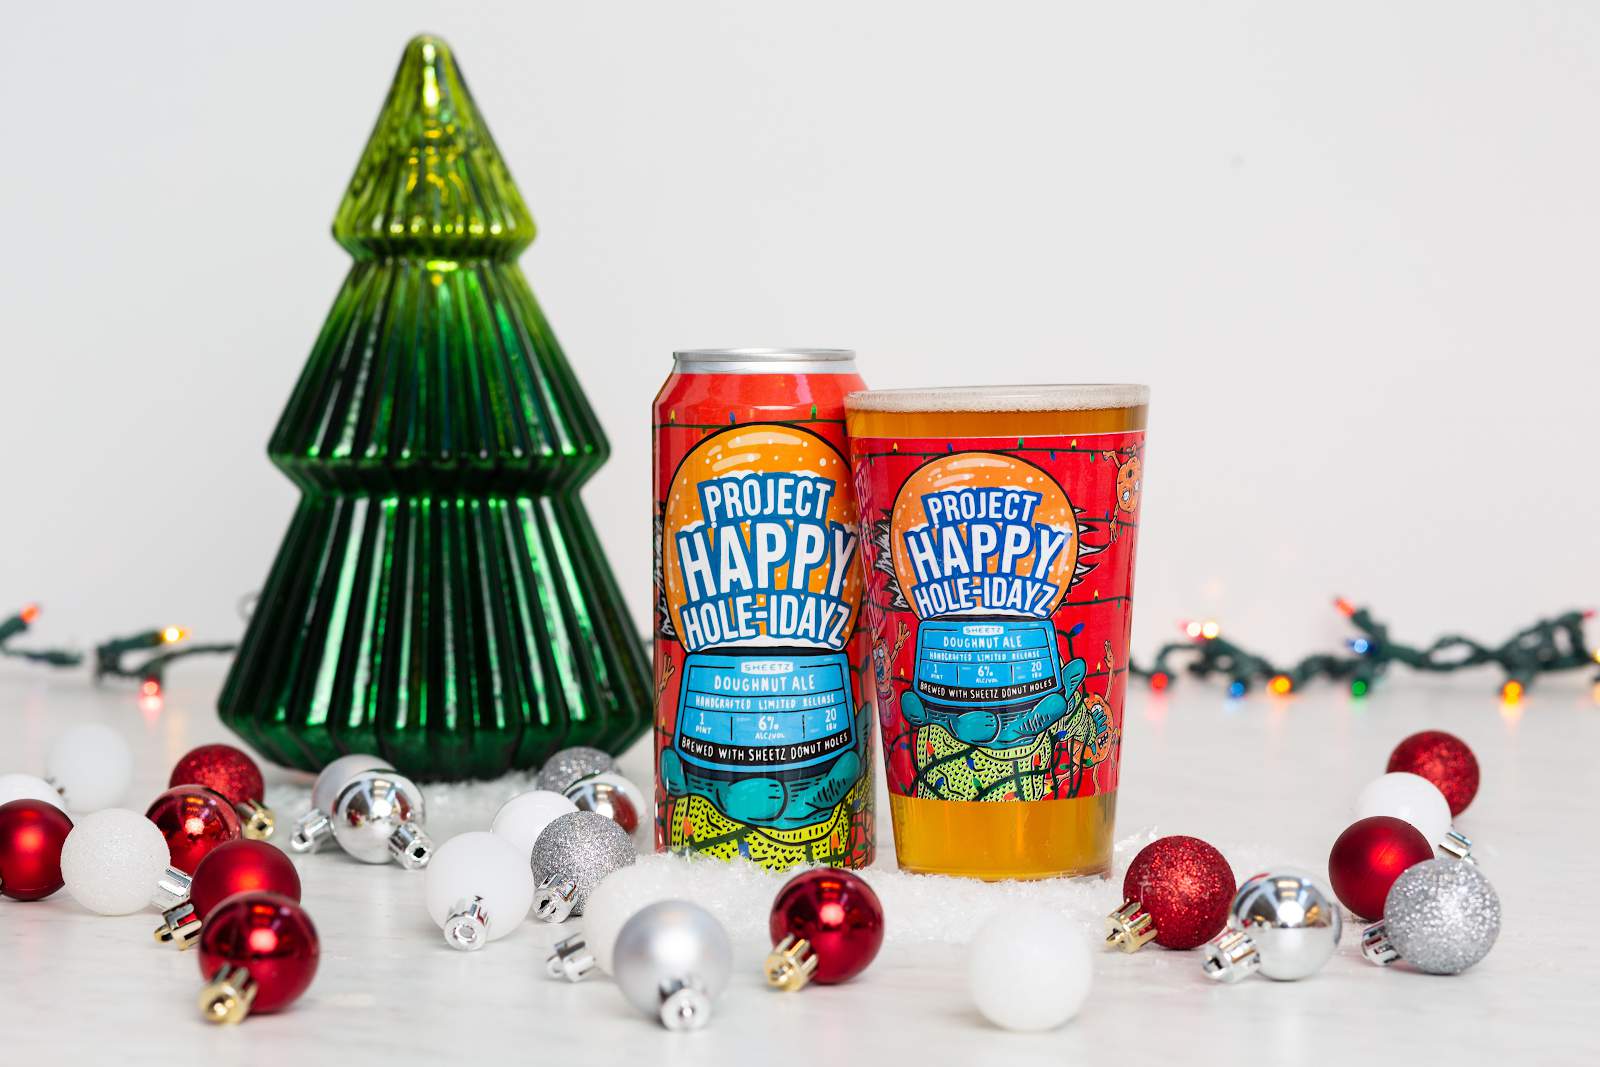 Sheetz debuting special donut-infused beer for the holidays